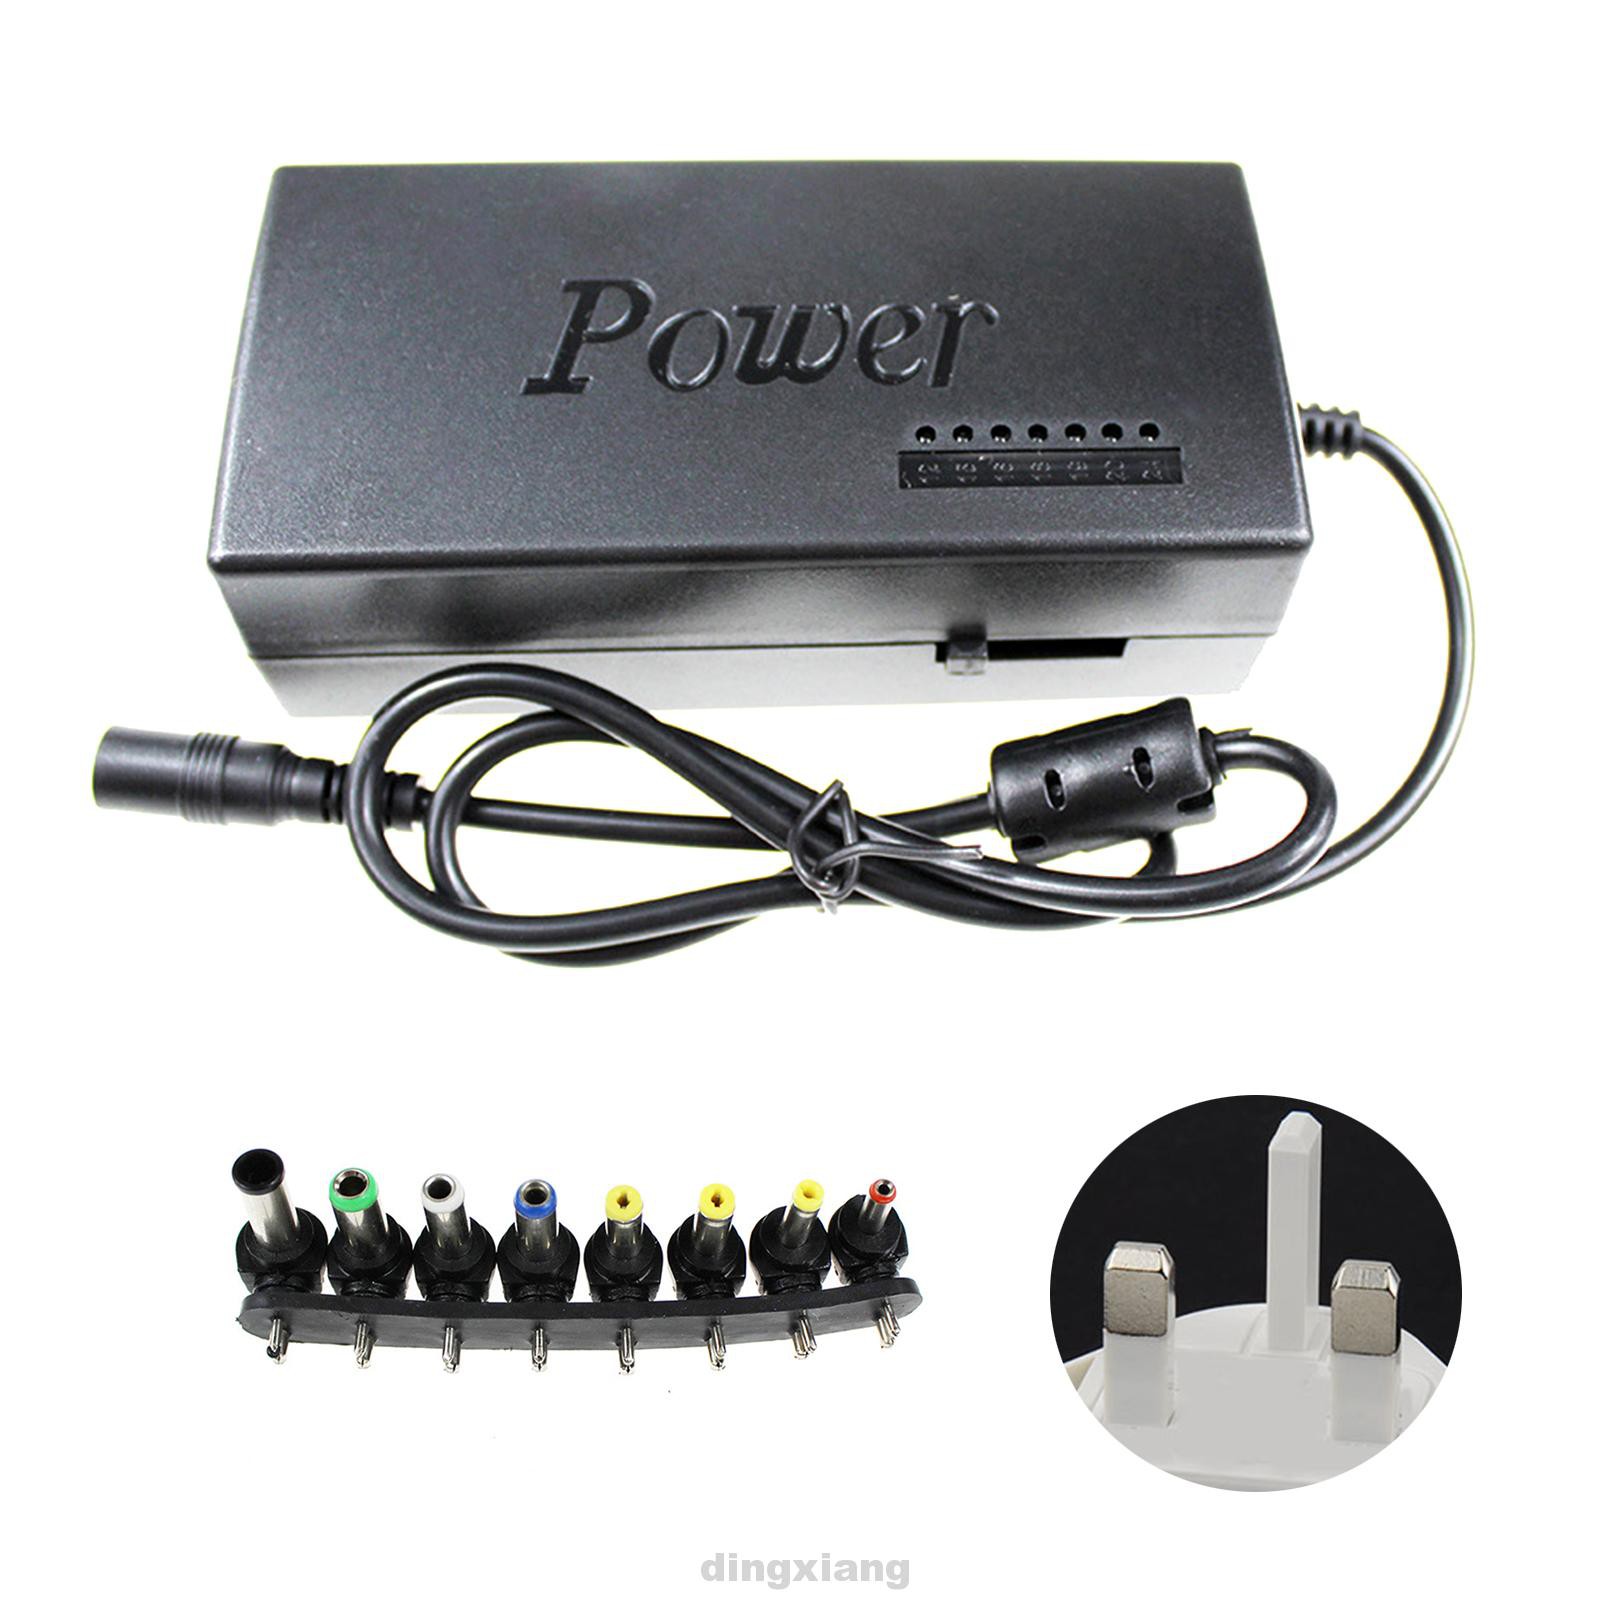 Power Supply Compact Portable Stable Home Office Easy Operate 8 Detachable Plugs Laptop Adapter | BigBuy360 - bigbuy360.vn